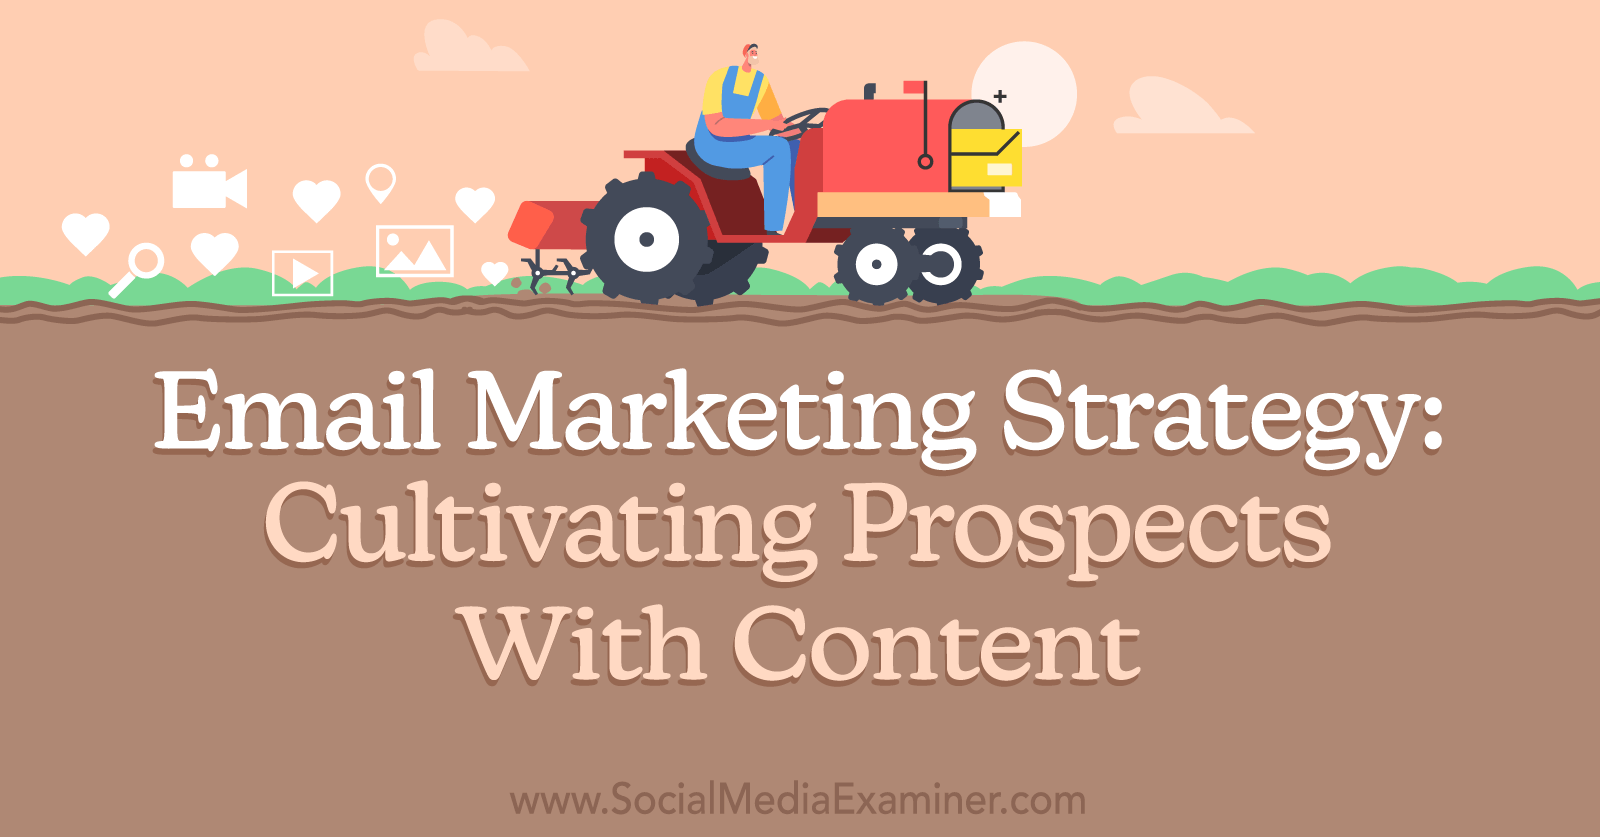 Email Marketing Strategy: Cultivating Prospects With Content by Social Media Examiner